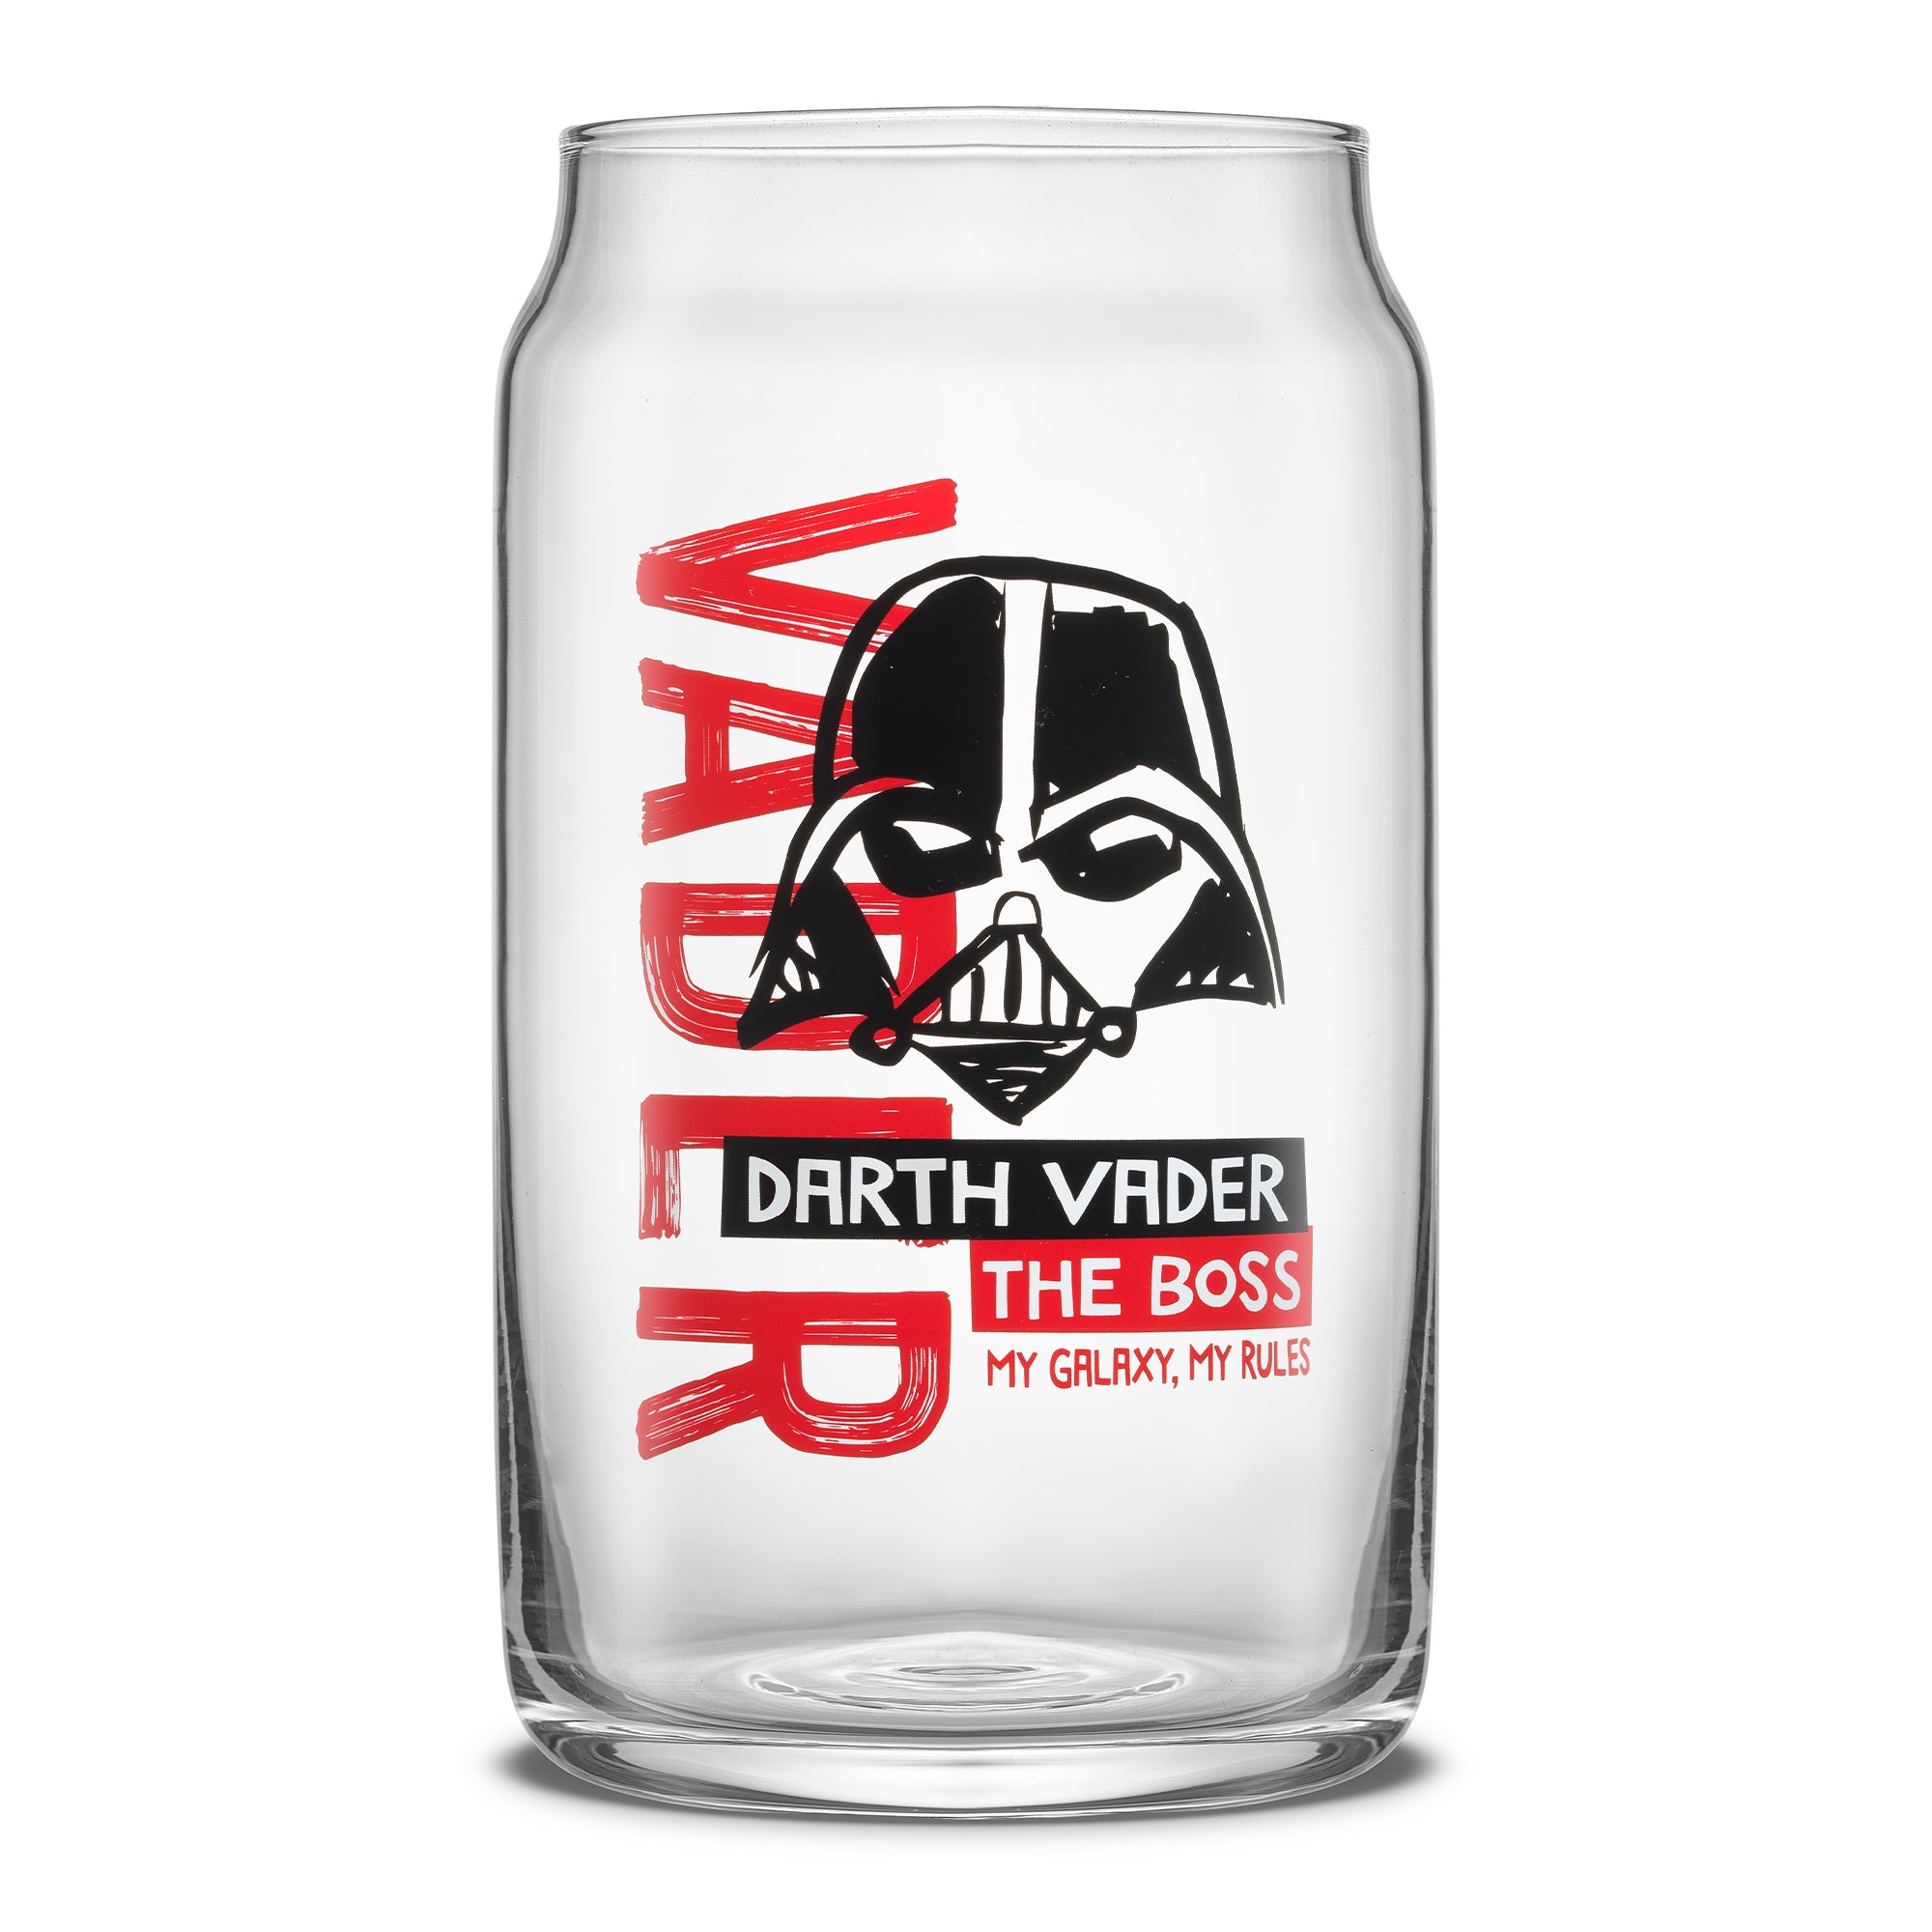 JoyJolt's Star Wars 'Now Playing' glass tumbler set, a must-have addition to any fan's drinkware collection. Featuring Darth Vadar.